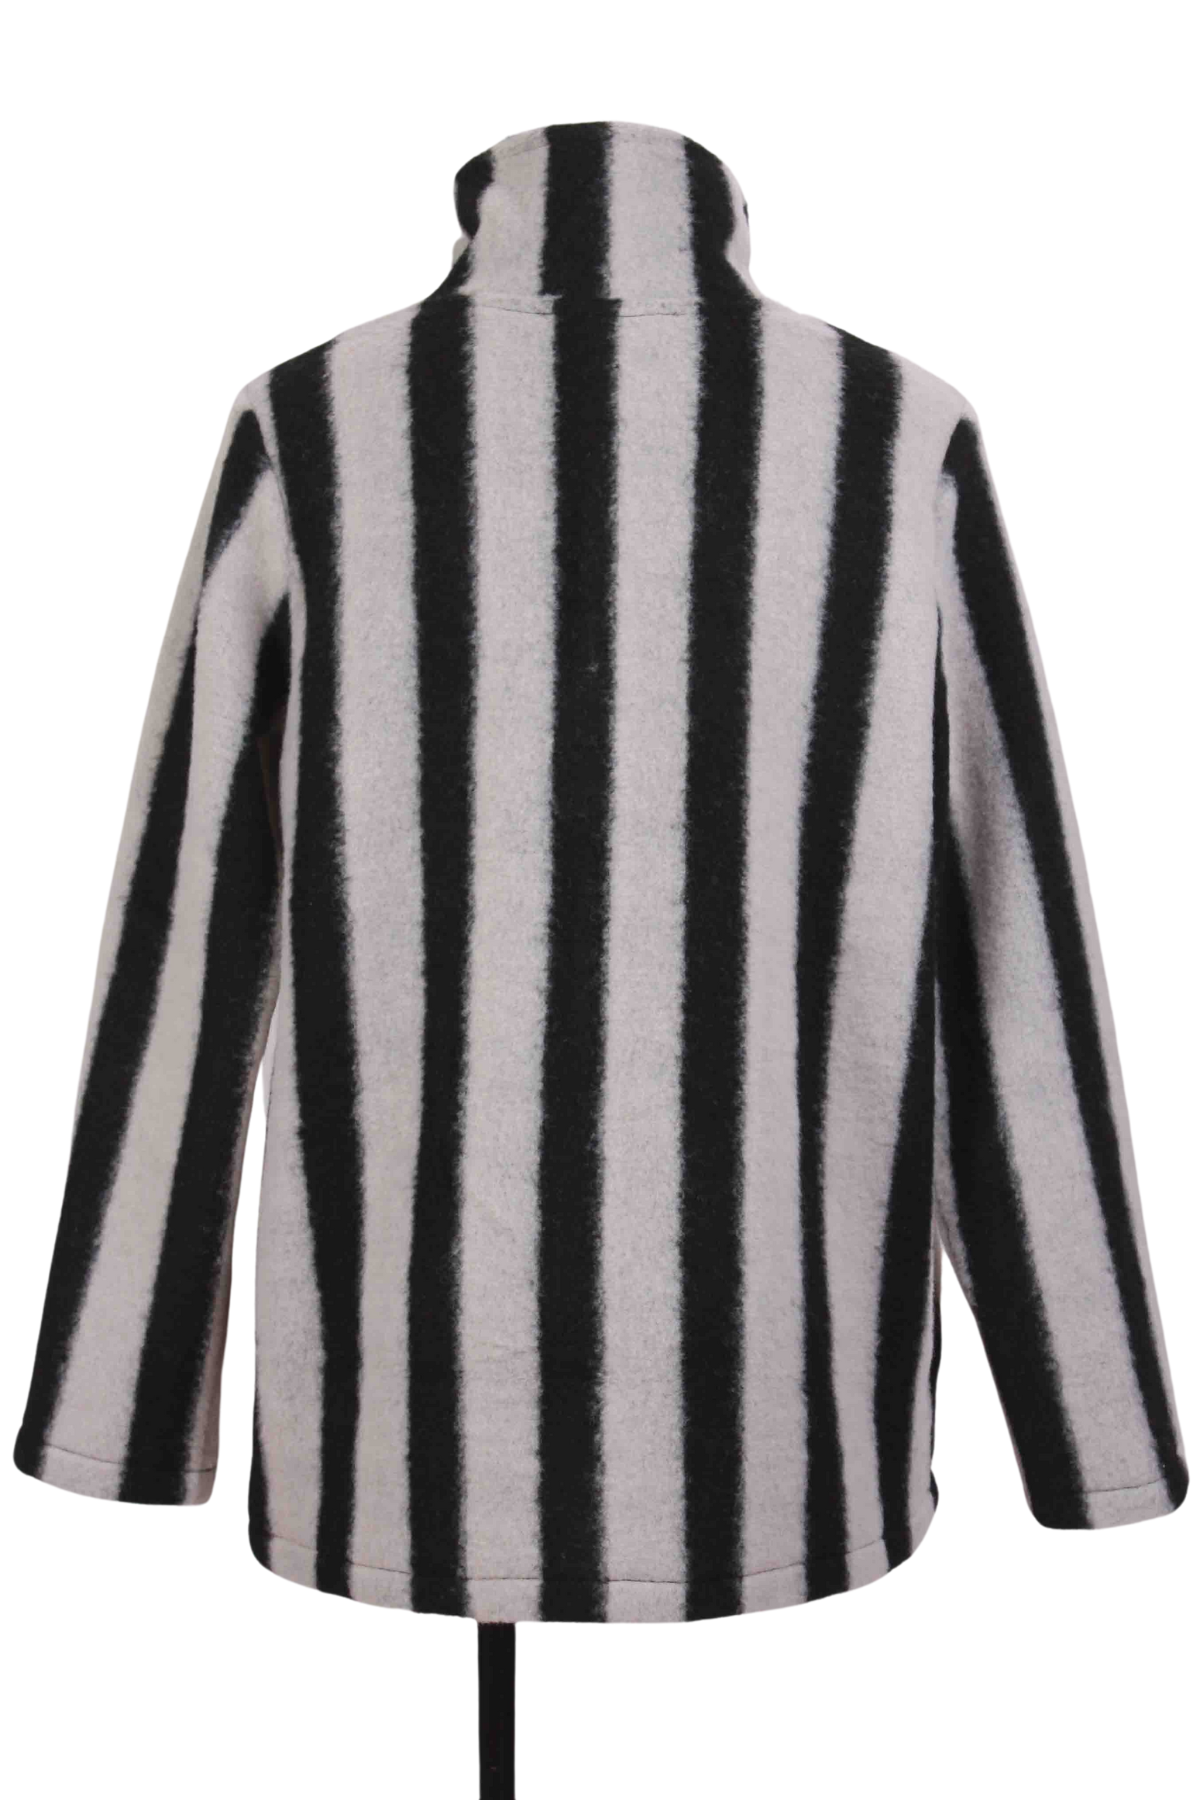 back view of black and sand Earn Stripes Swing Coat by Liv by Habitat